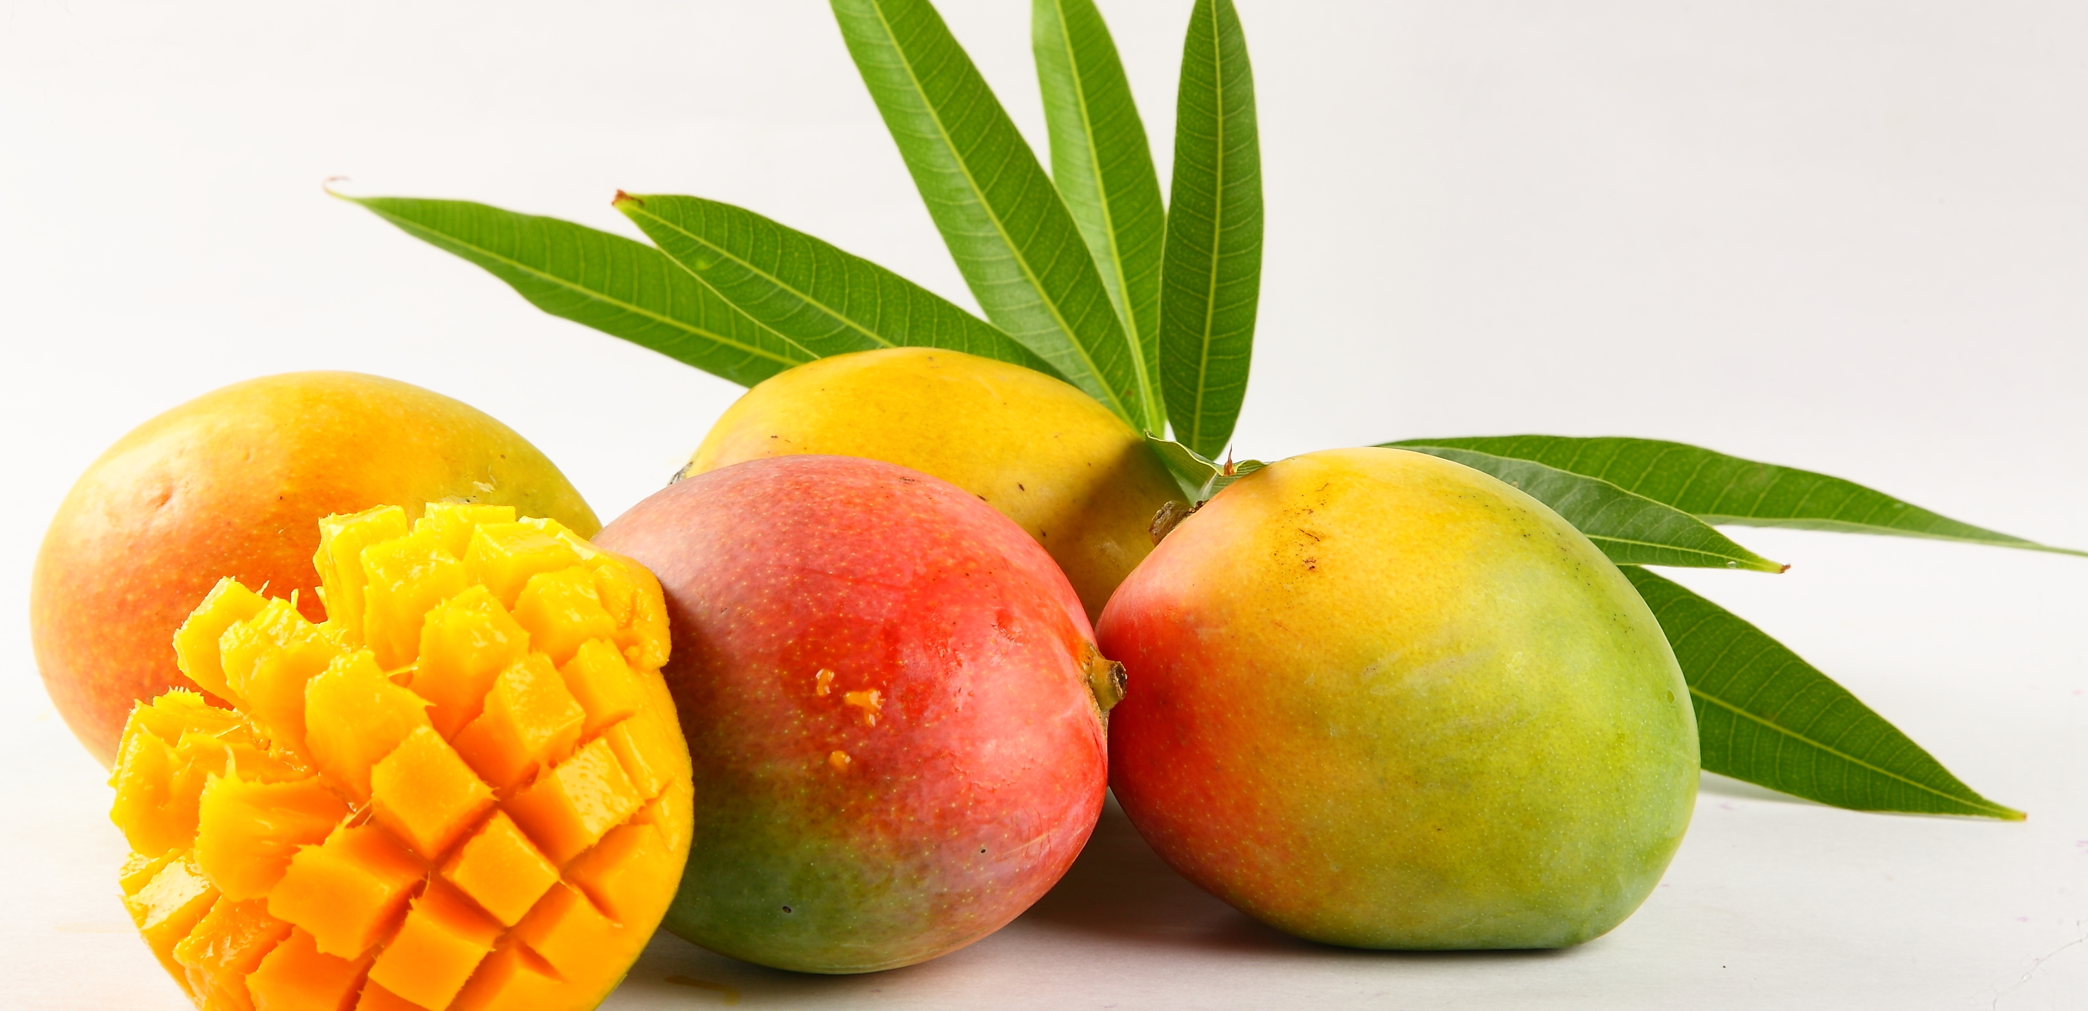 Study Suggests Mangoes Can Reduce IBS Symptoms | Pain Resource